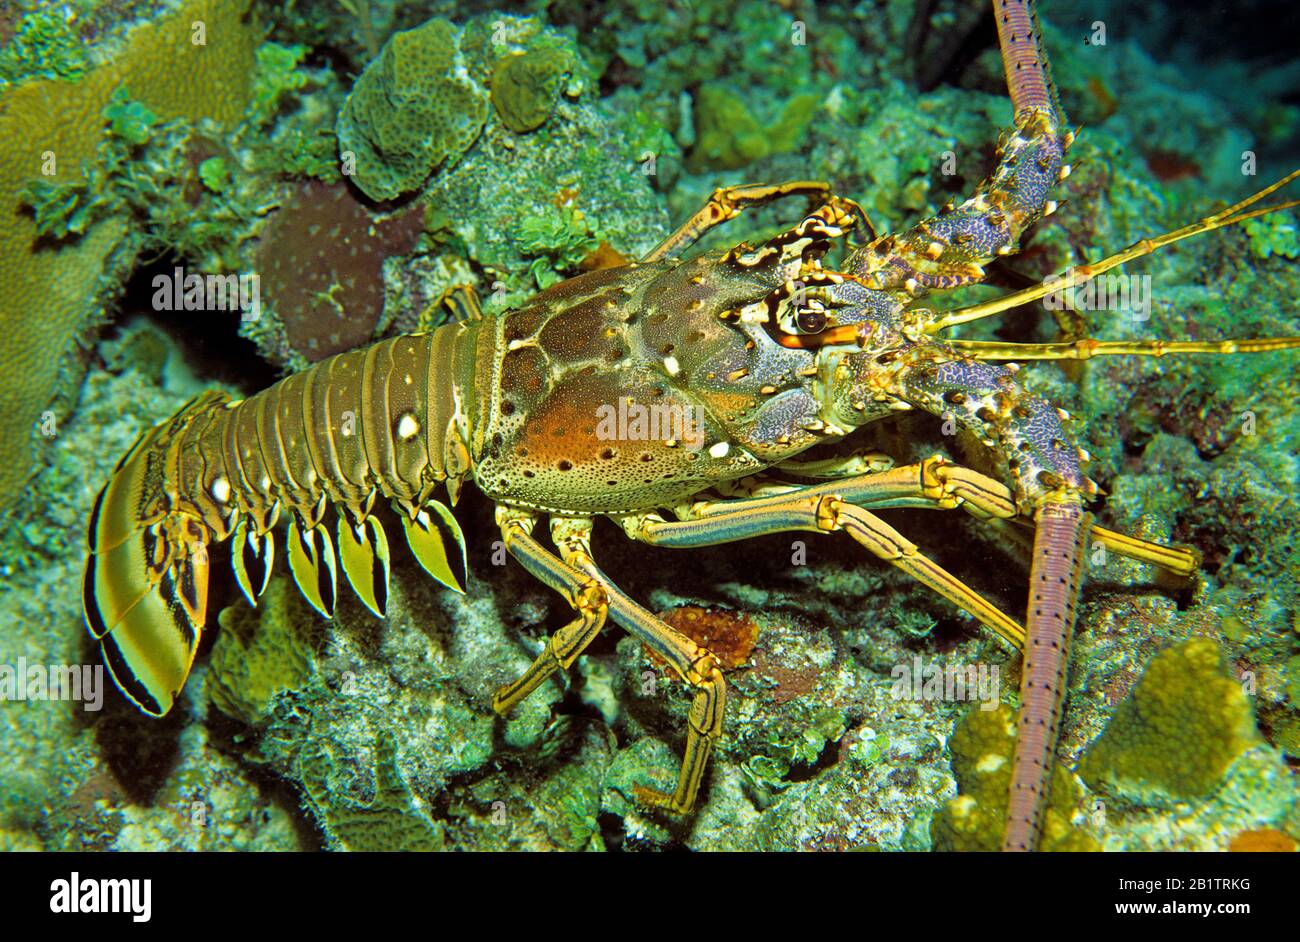 Caribbean Spiny Lobster (Panulirus argus) walking over a coral reef, Curacao Stock Photo